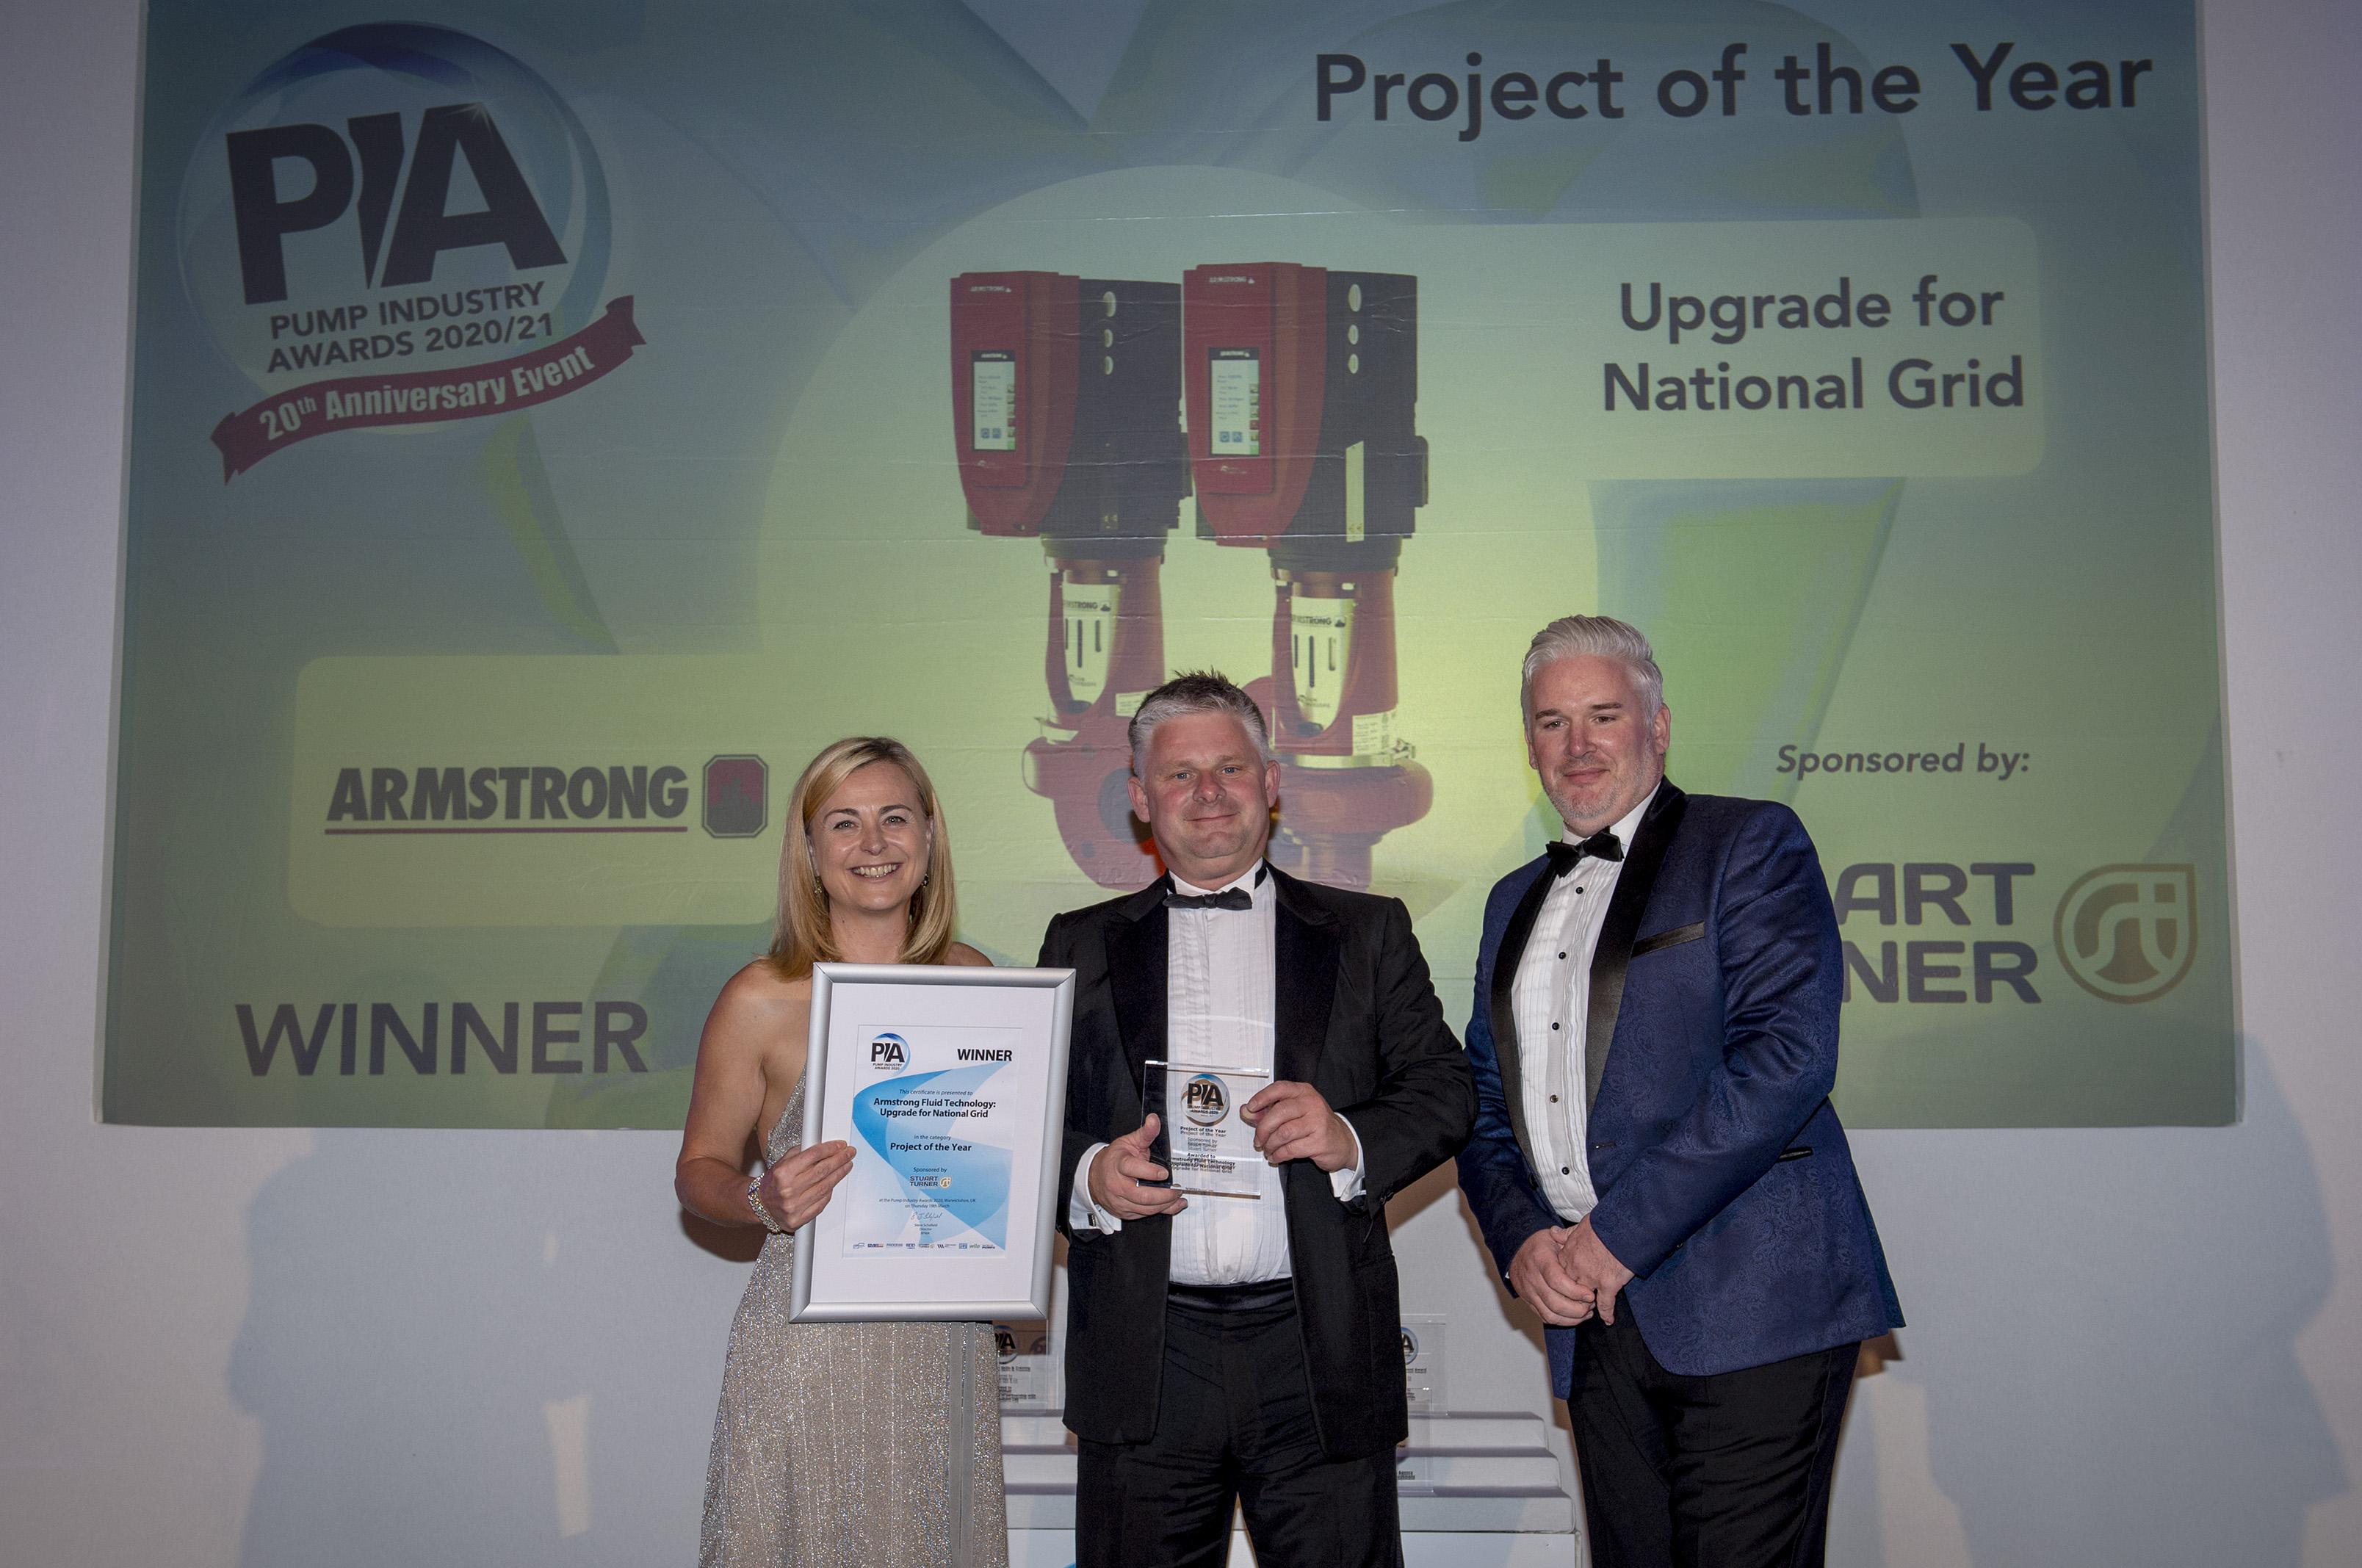 Philippa Forrester (left) presenting the award to Stephen Hart, sales director - UK, Armstrong Fluid Technology with sponsor's (Stuart Turner) global sales director, Kevin Moore (right).